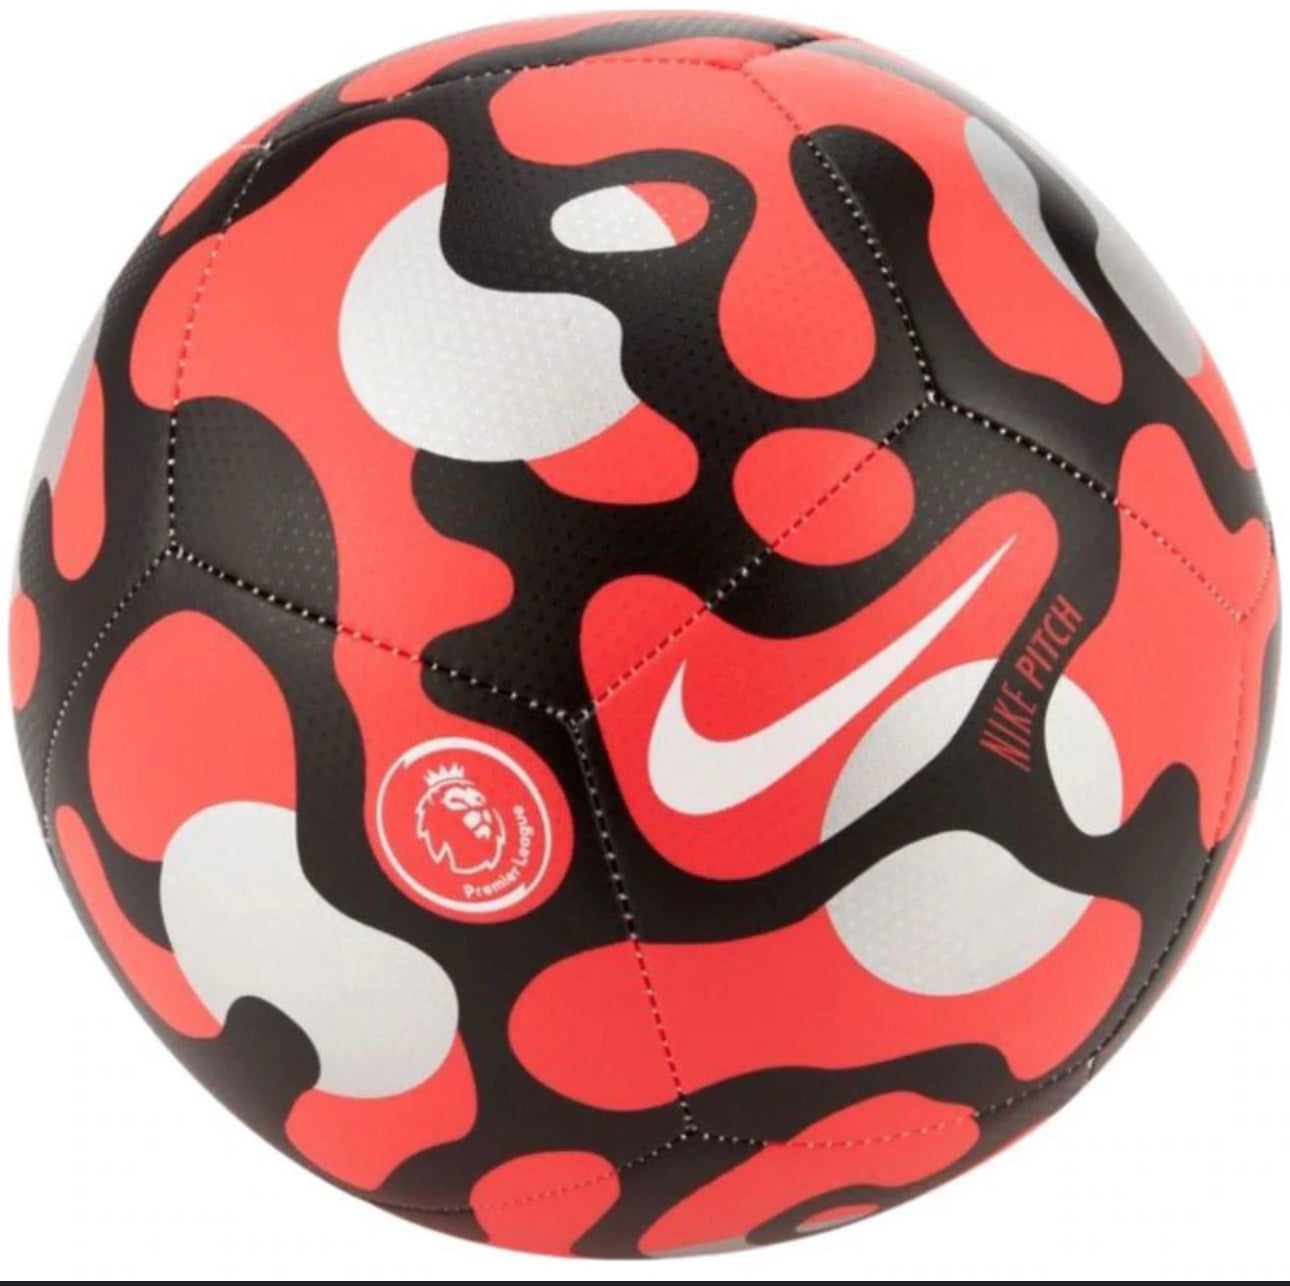 Nike Pitch Premier League Football 2021/22 Red